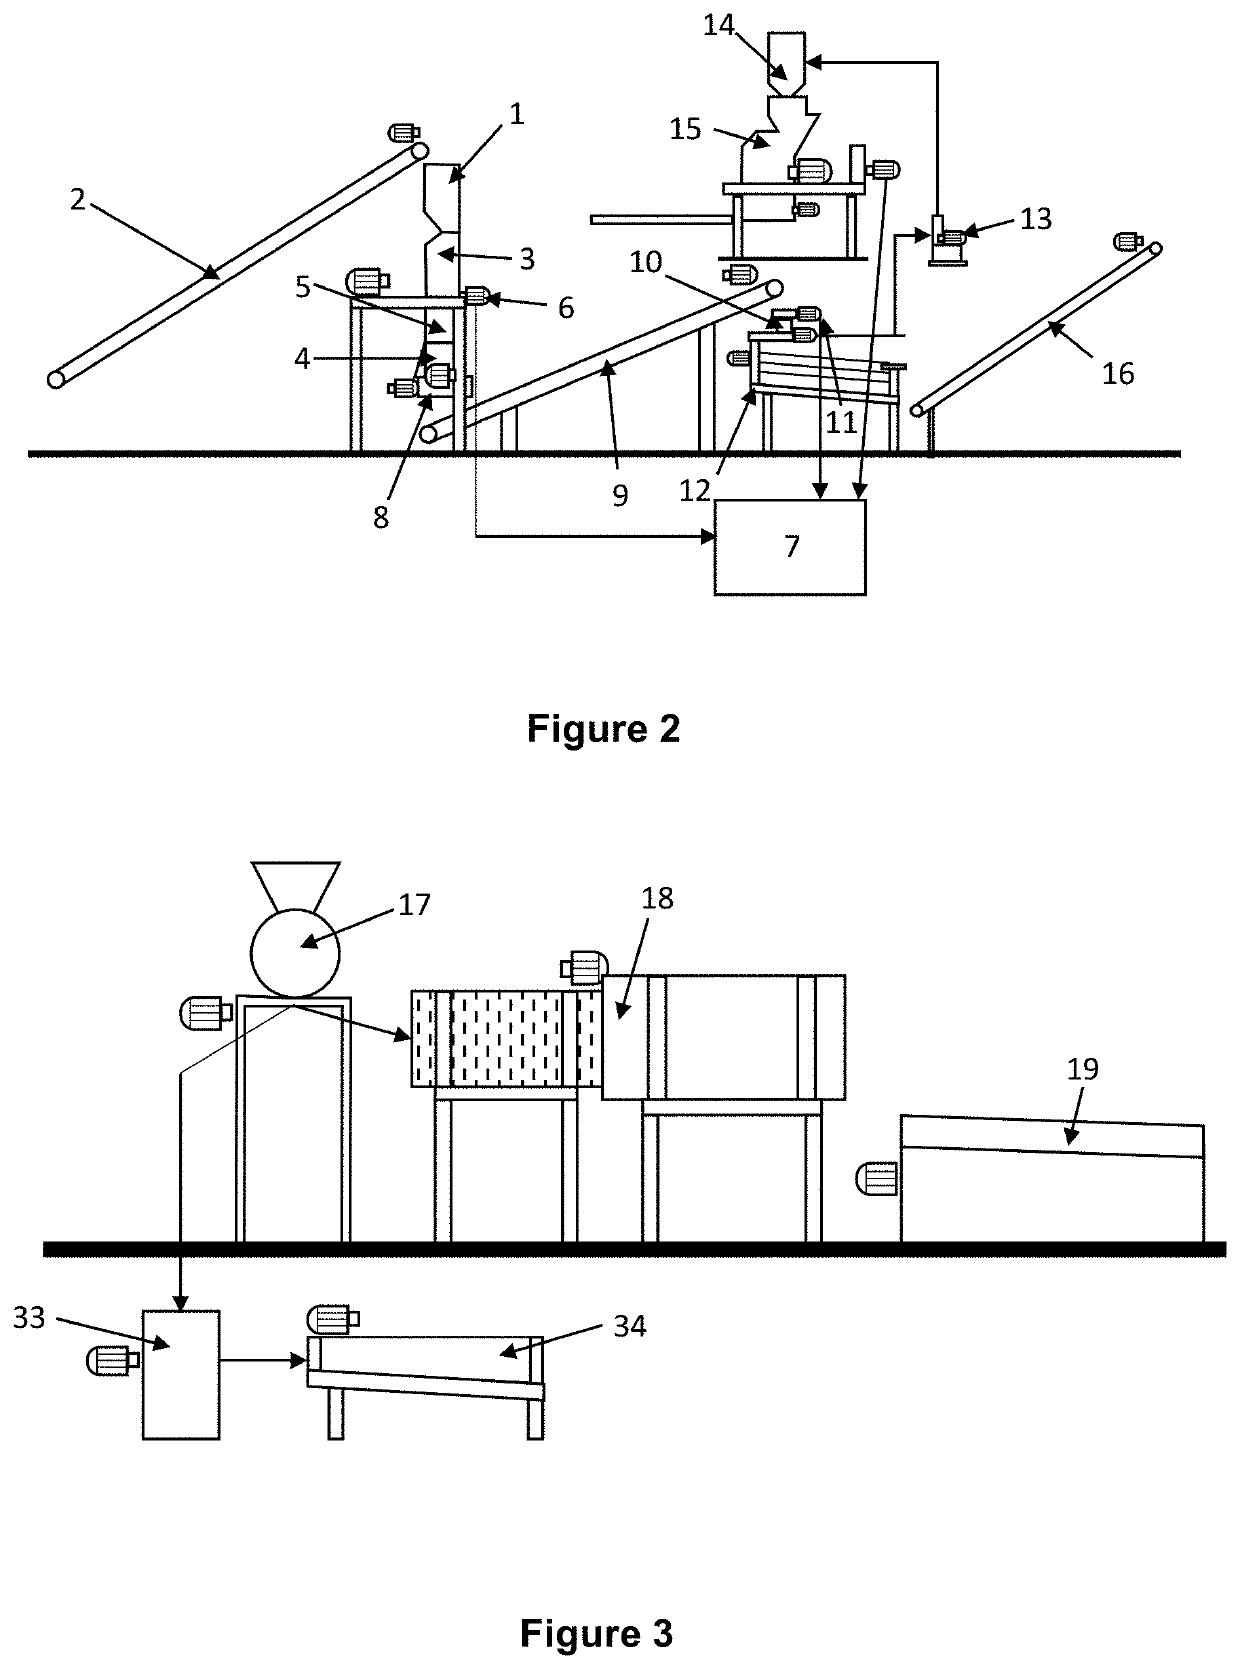 System for physical-mechanical recovery and refining of non-ferrous metals from electronic scrap